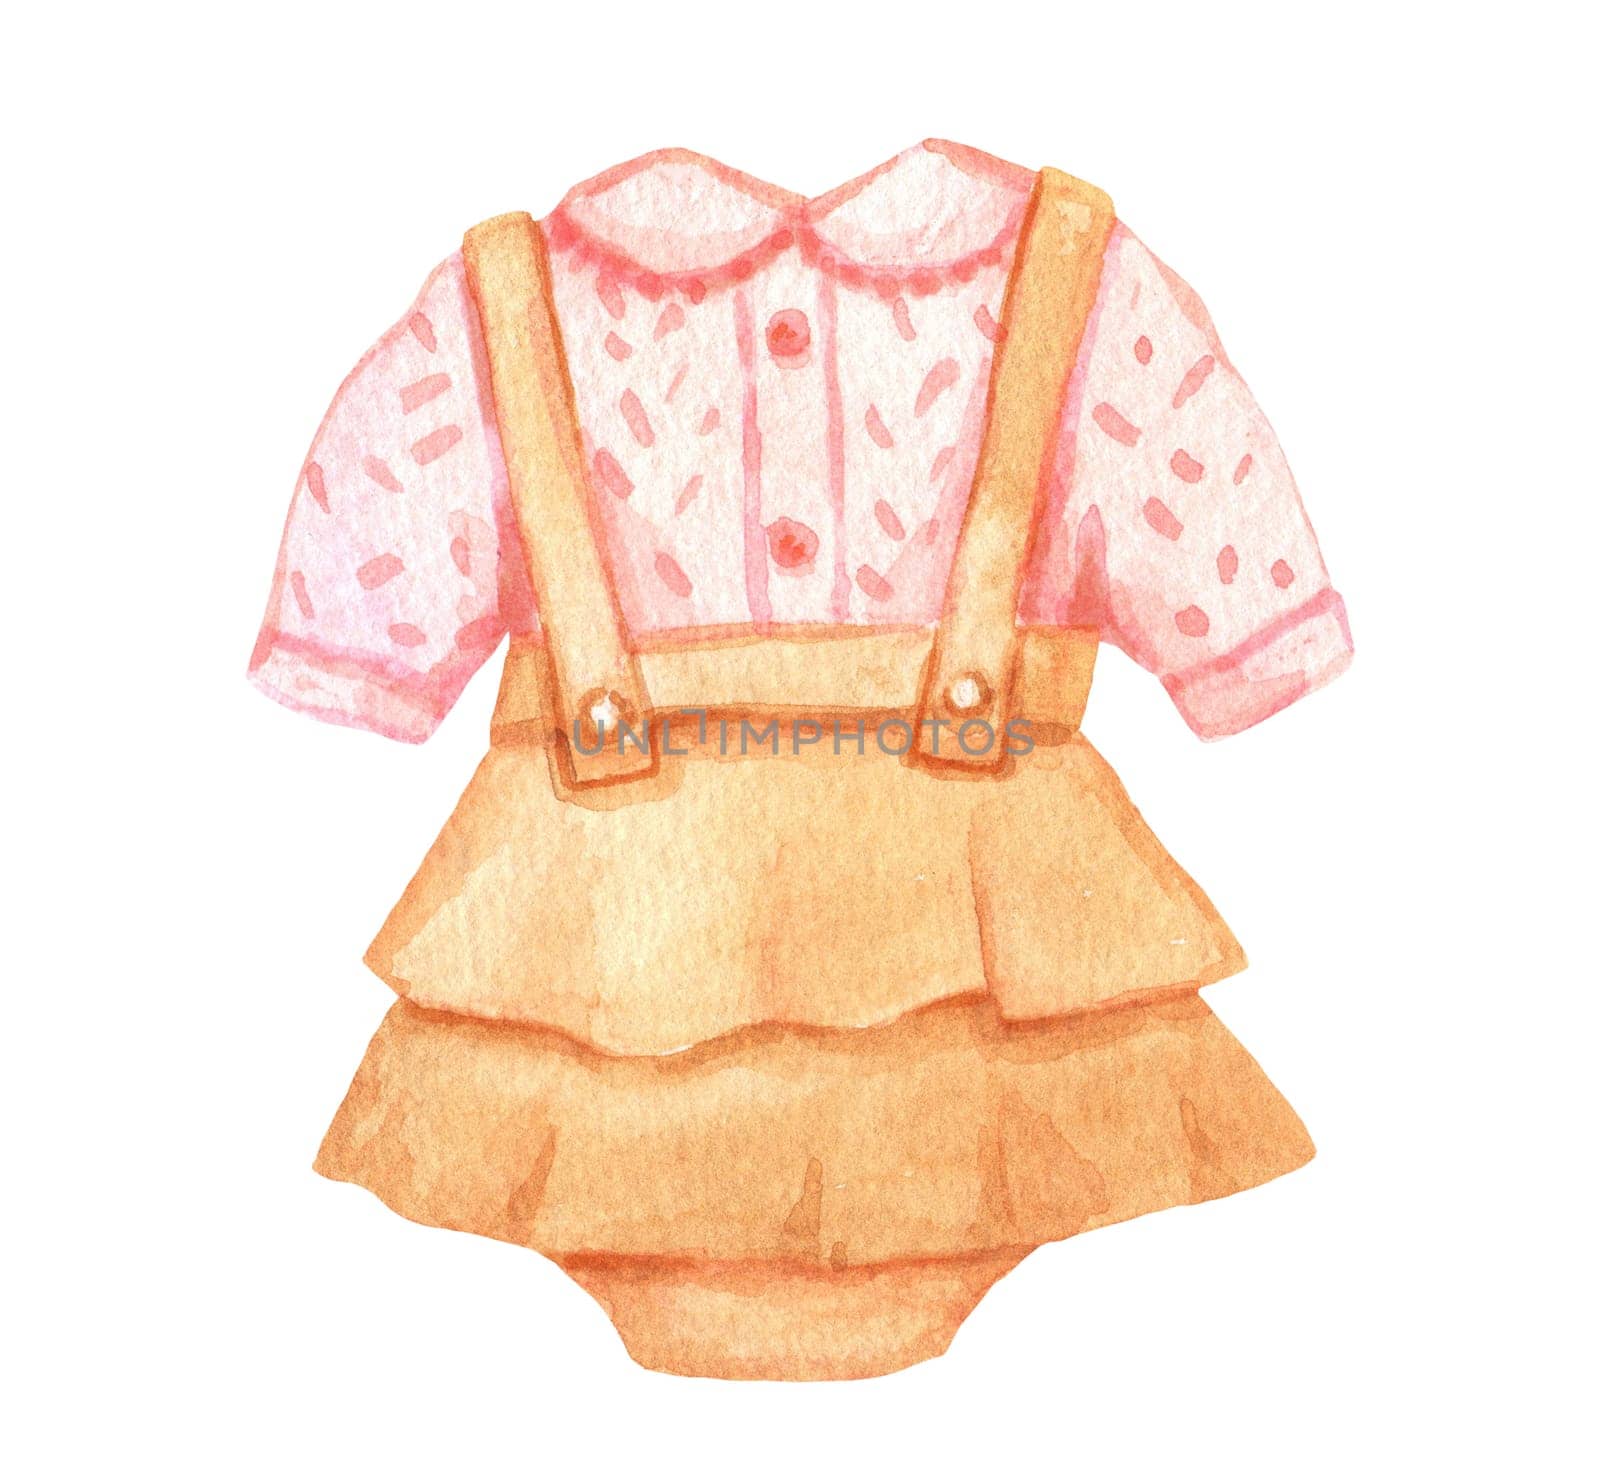 Infant cute dress illustration. Watercolor sketch Baby girl clothes isolated on white by ElenaPlatova